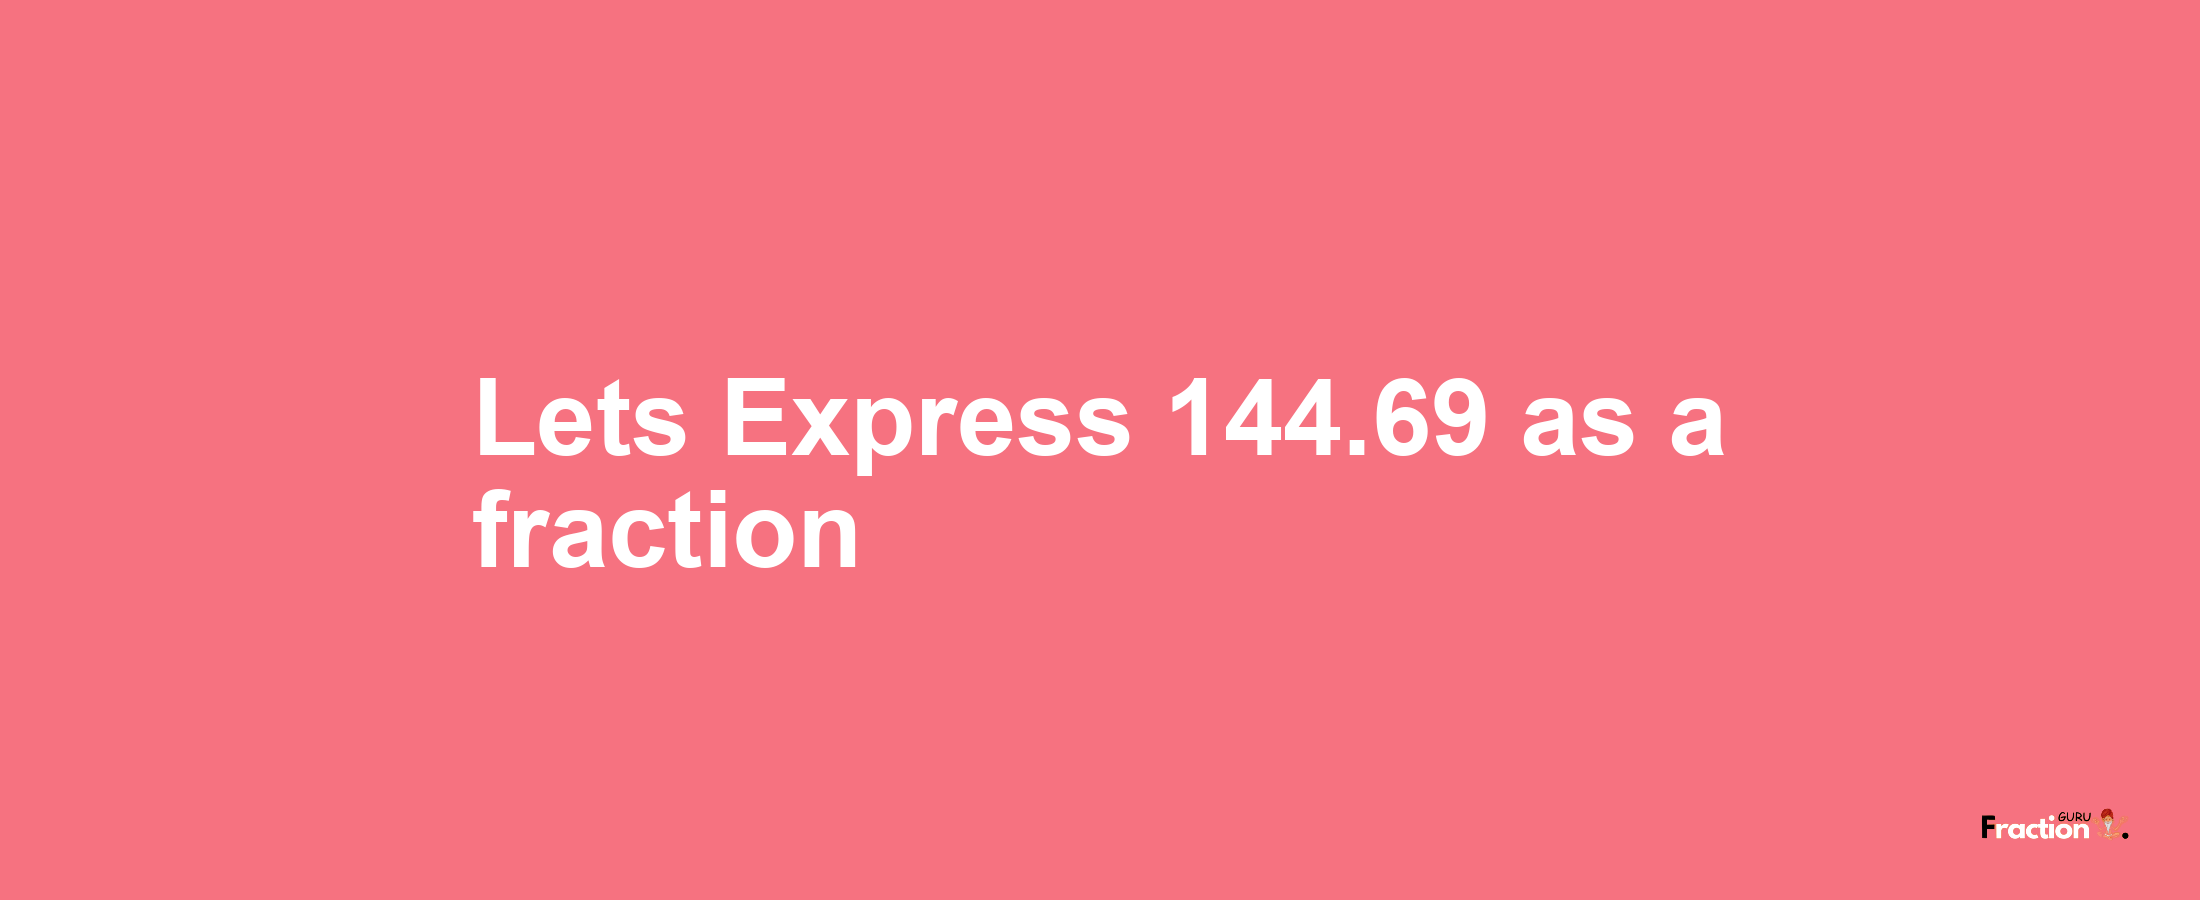 Lets Express 144.69 as afraction